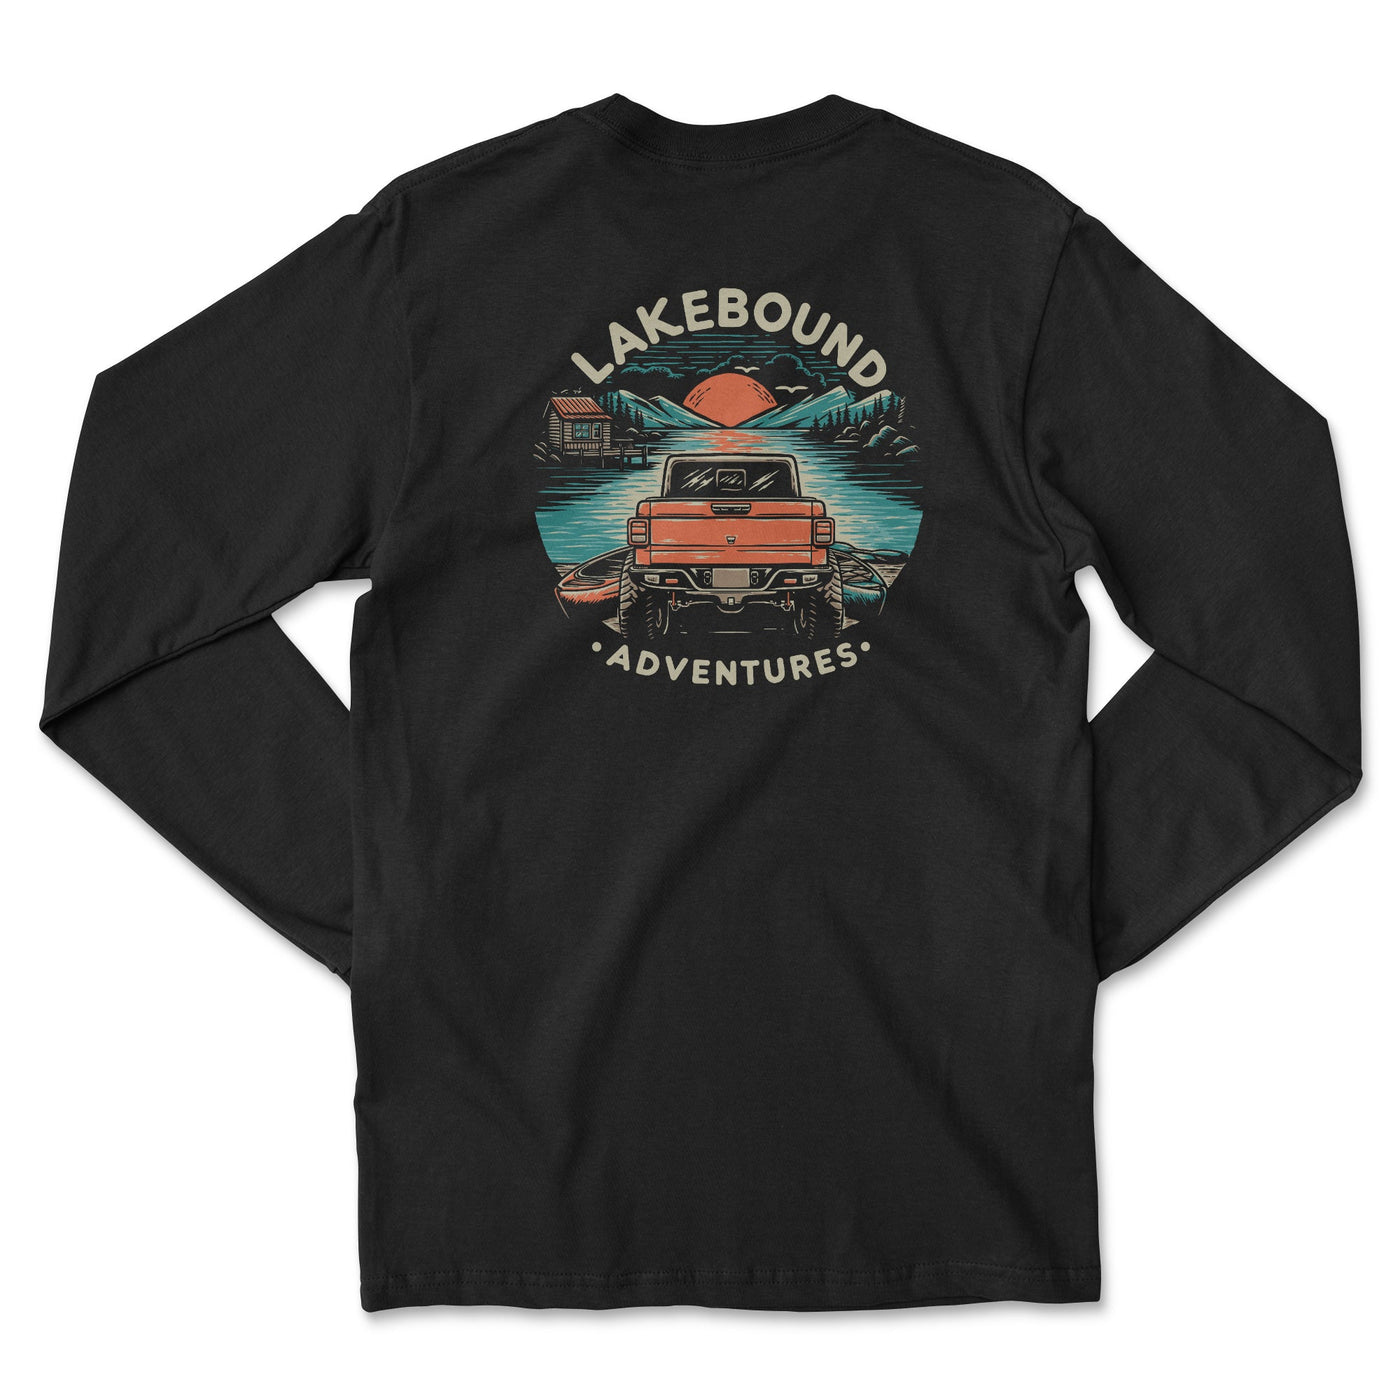 Lakefront Wanderlust Long-Sleeve Tee - Goats Trail Off-Road Apparel Company